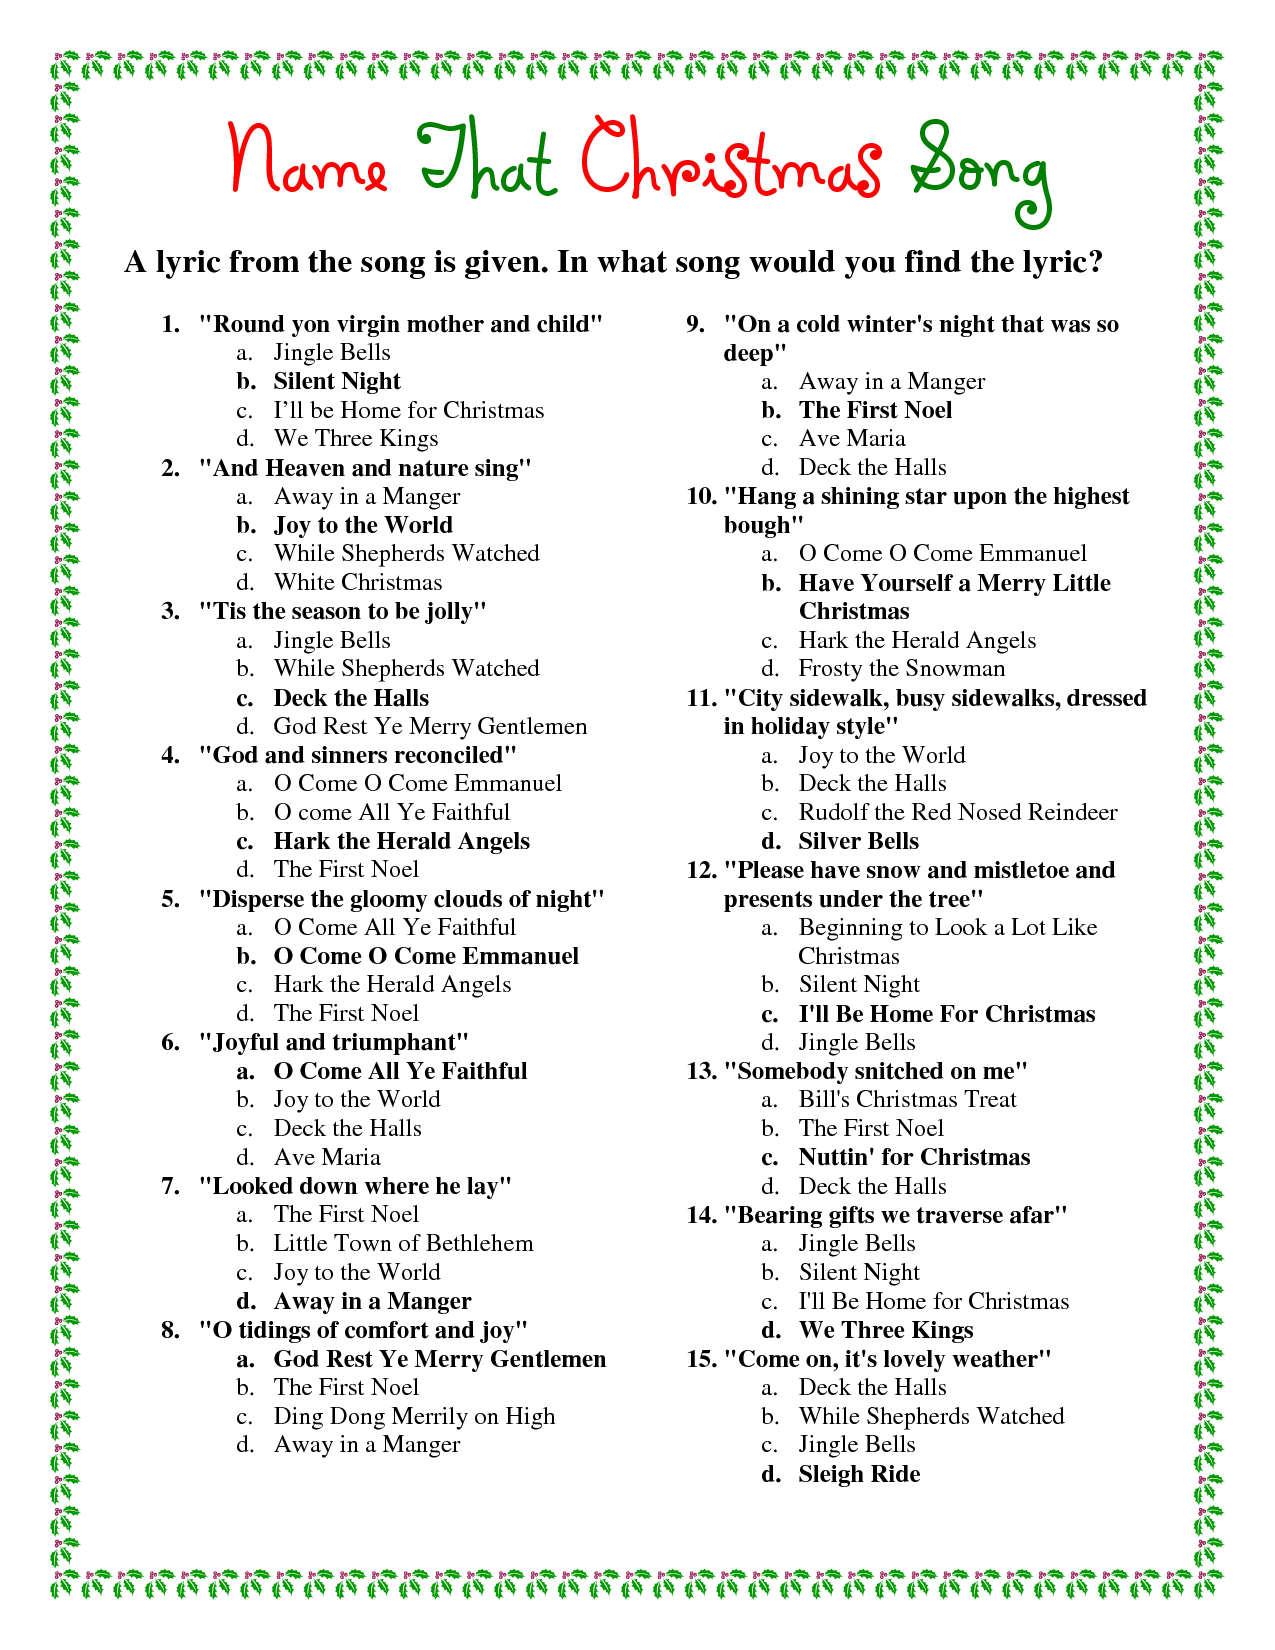 Fun Printable Christmas Trivia Questions And Answers